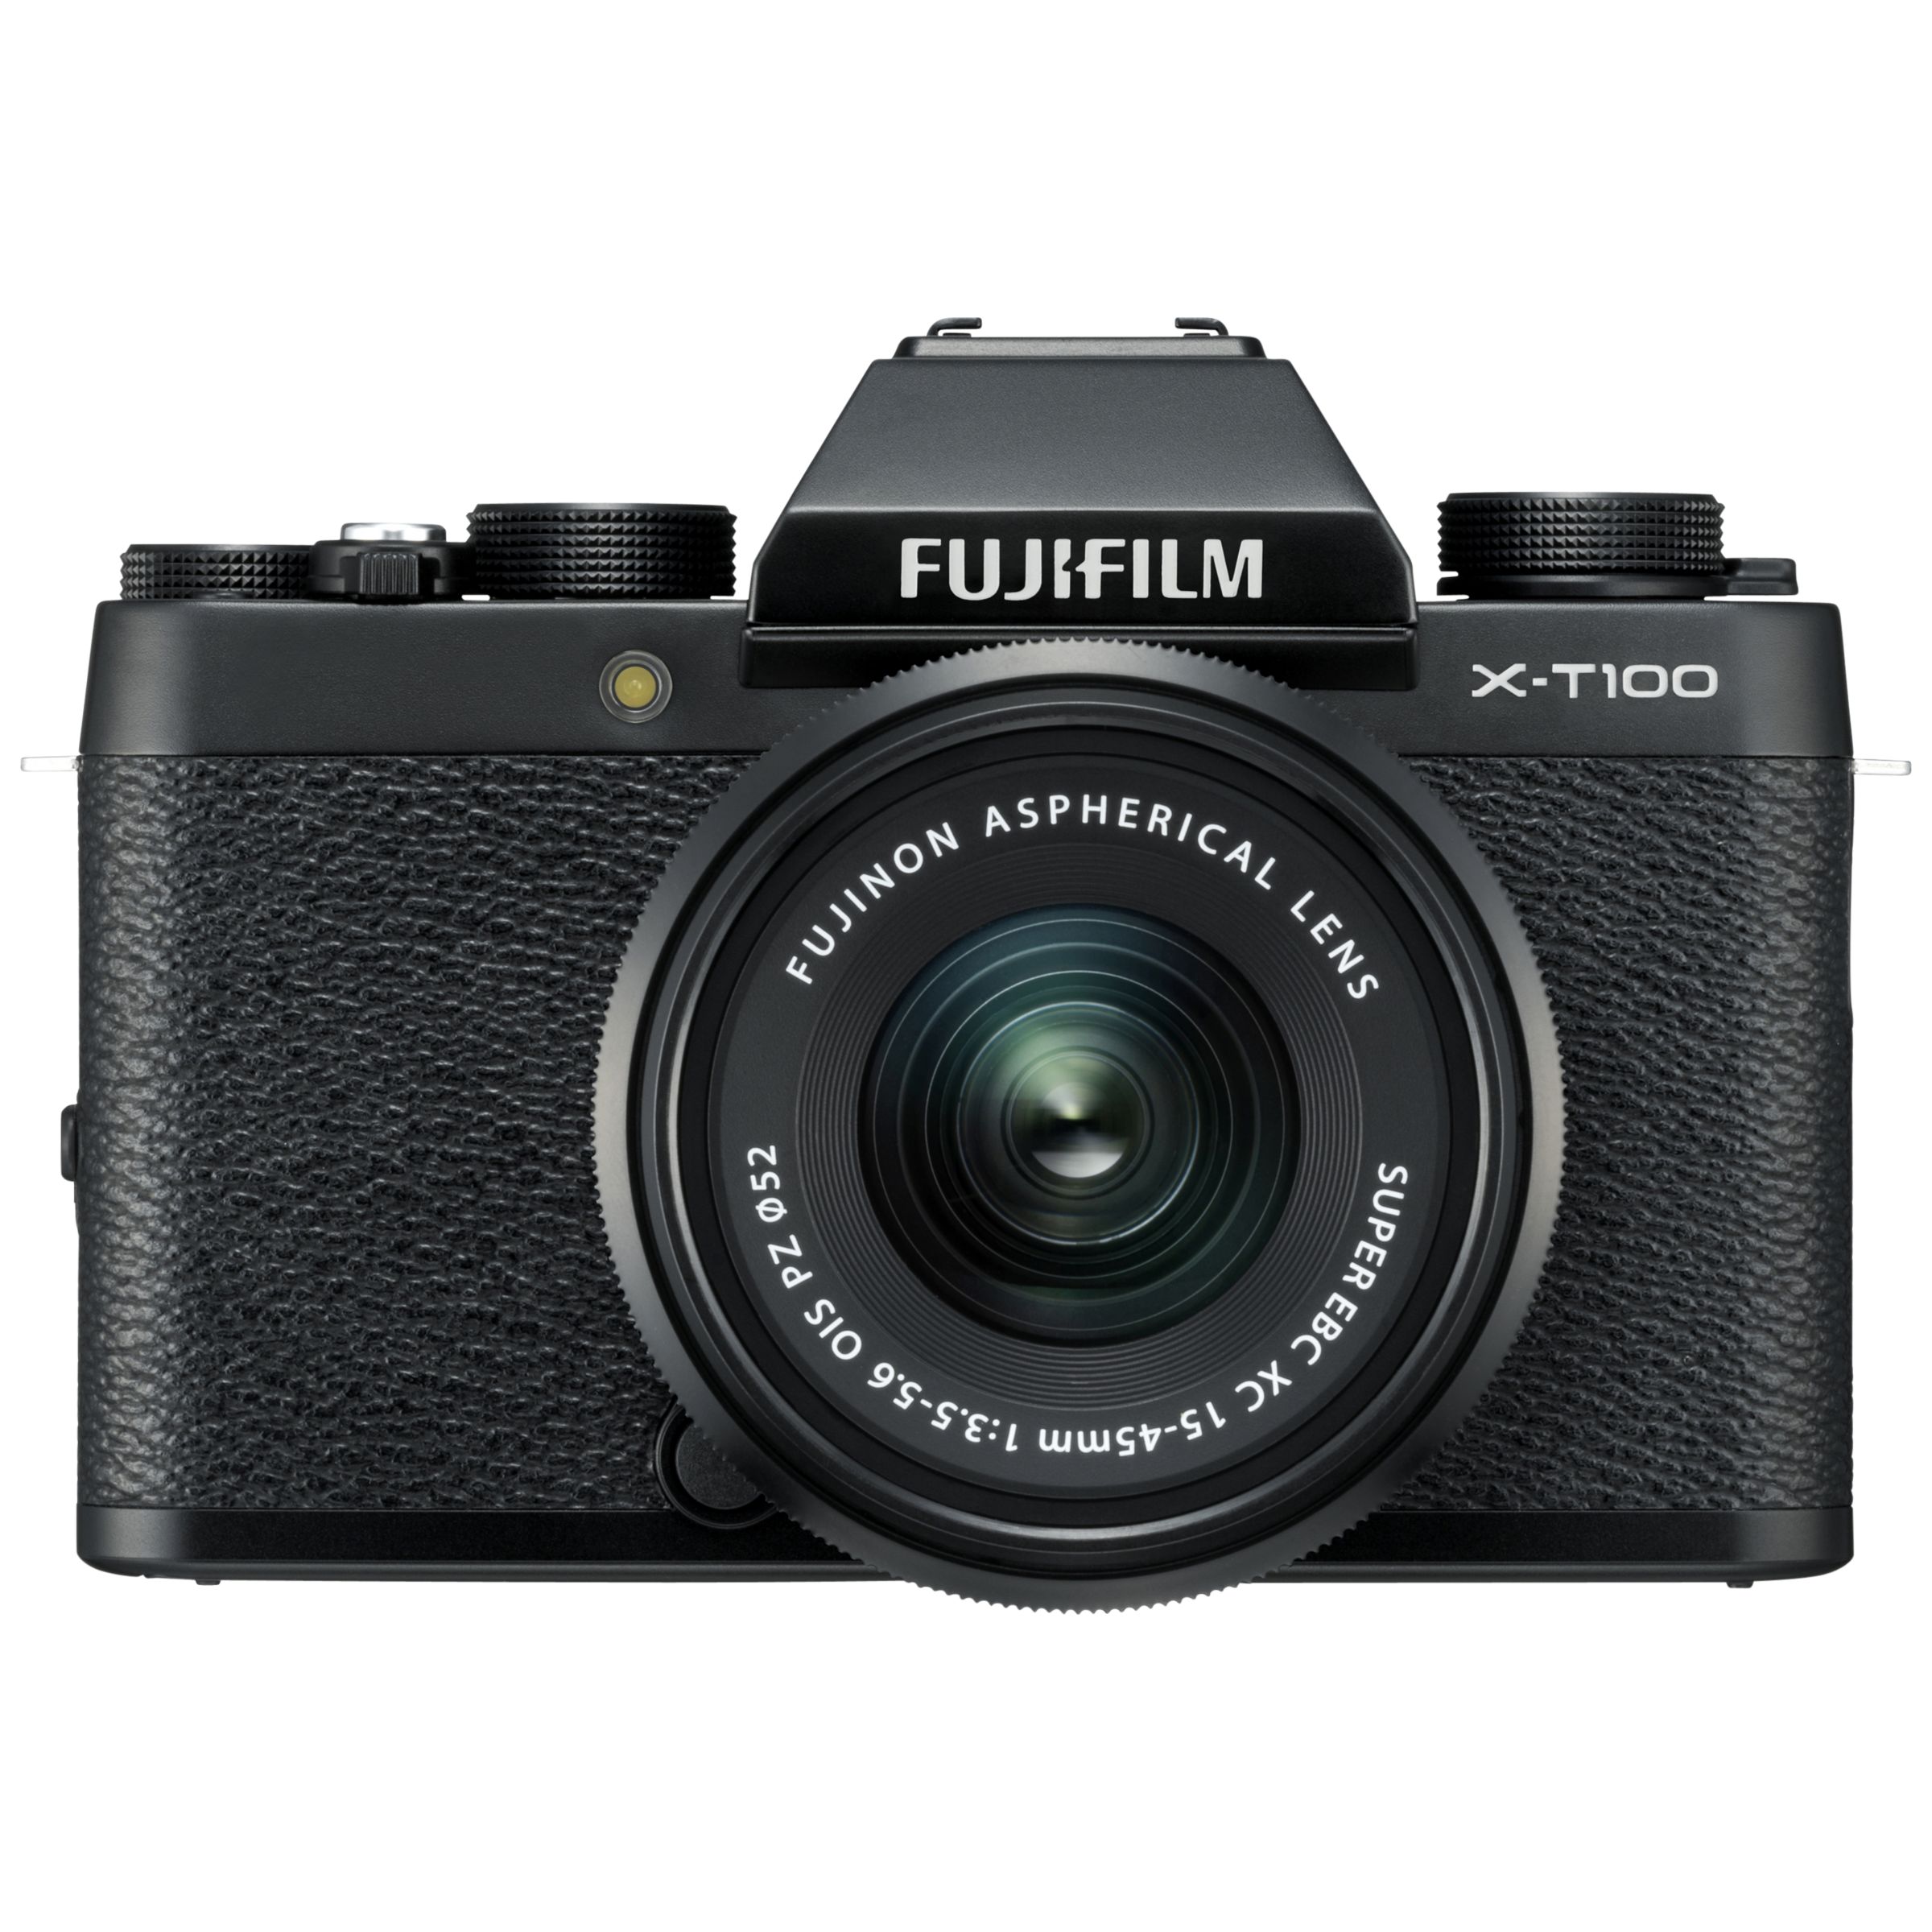 Fujifilm X-T100 Compact System Camera with 15-45mm XC Lens, 4K Ultra HD, 24.2MP, Wi-Fi, Bluetooth, EVF, 3 Tiltable Touch Screen